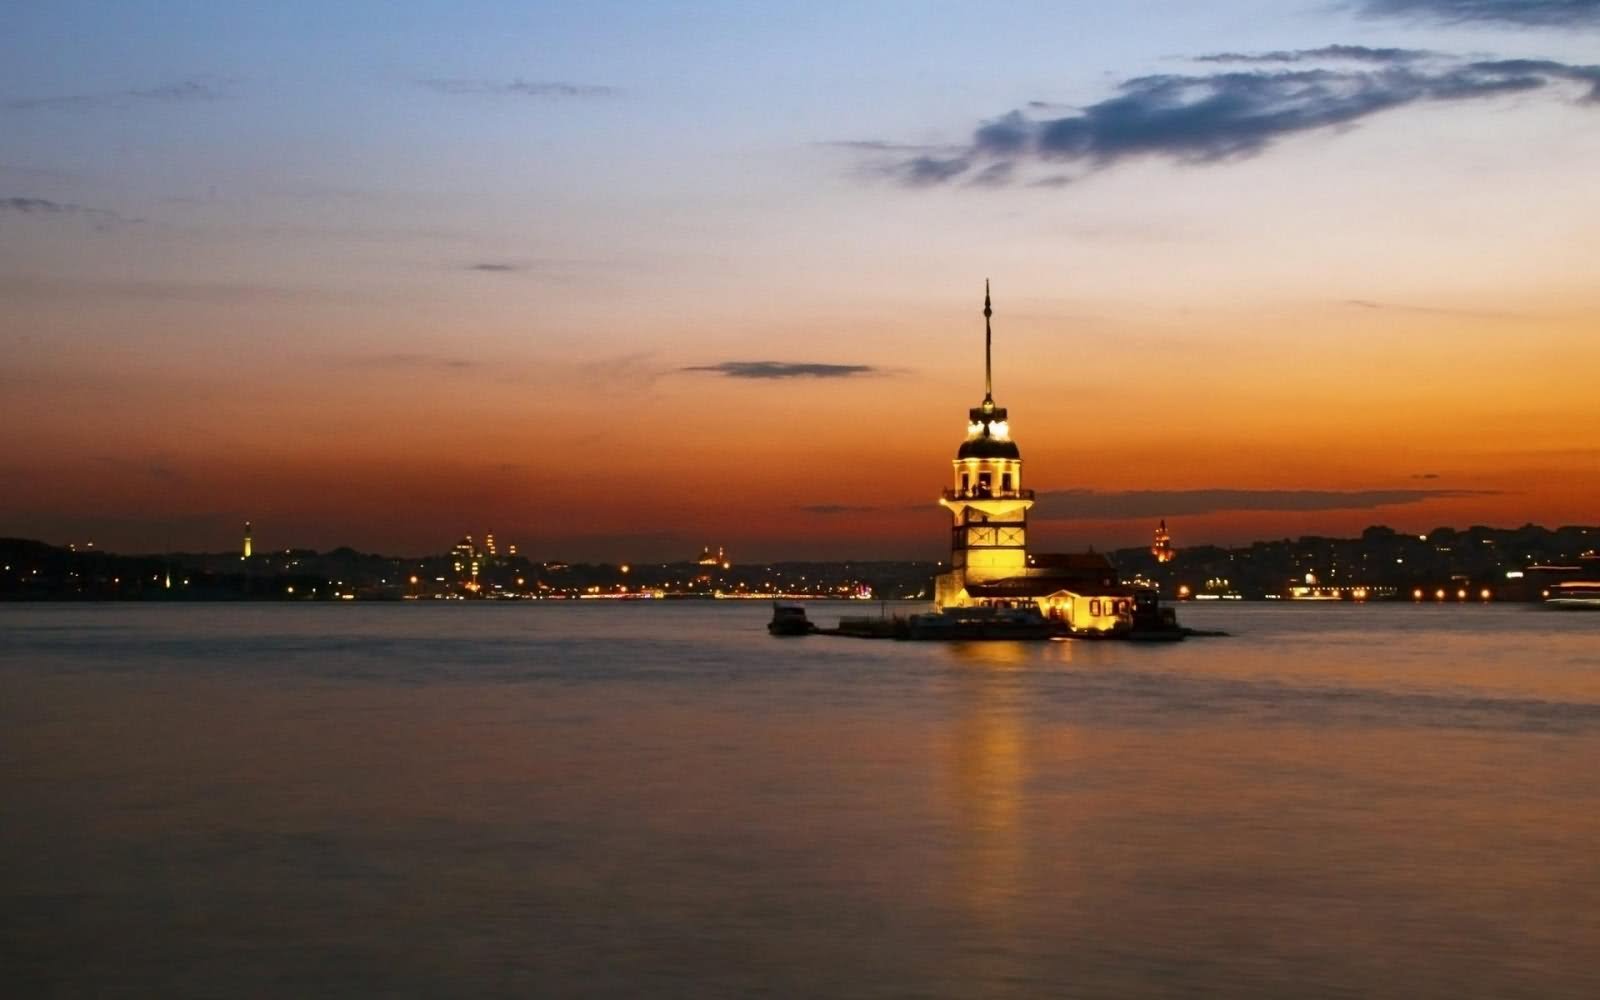 Sunset View Image Of The Maiden's Tower, Istanbul